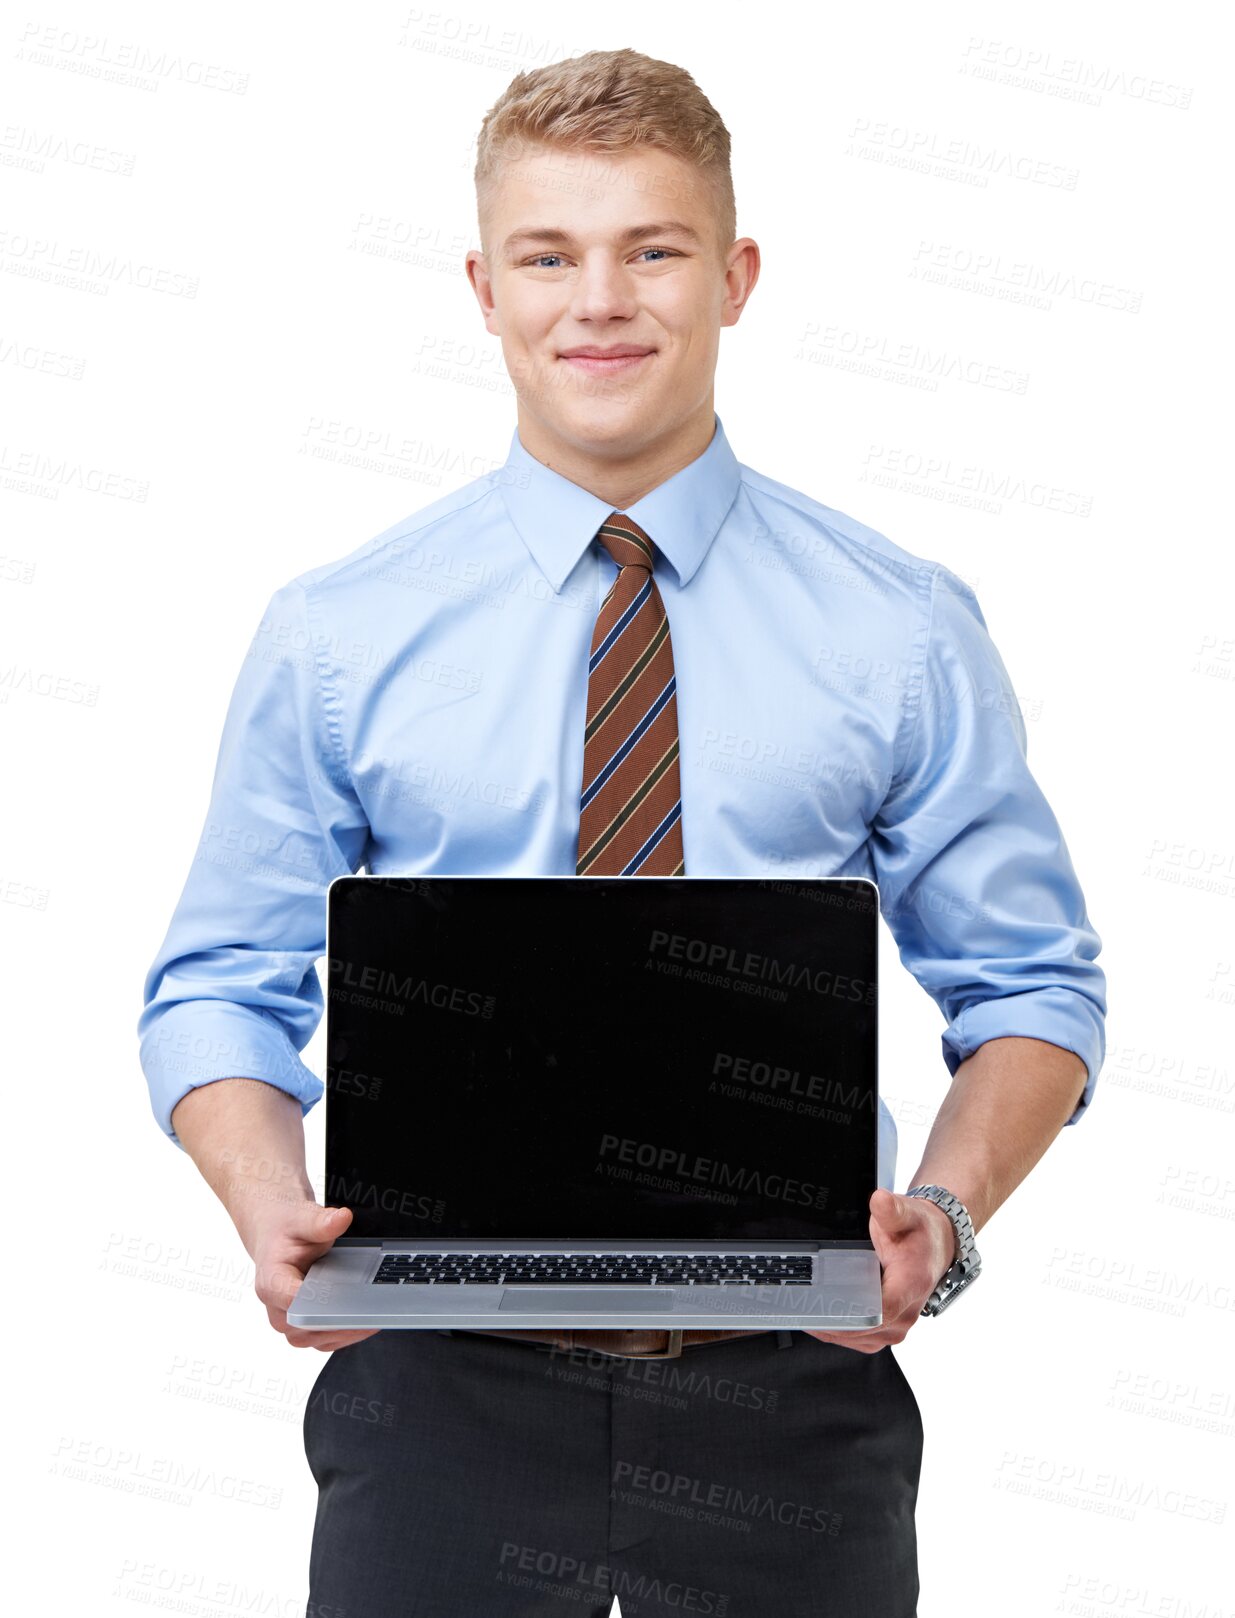 Buy stock photo Portrait, happy businessman or mockup on laptop, screen or technology on isolated, transparent or PNG background. Computer, monitor or mock up with business man, model or professional entrepreneur